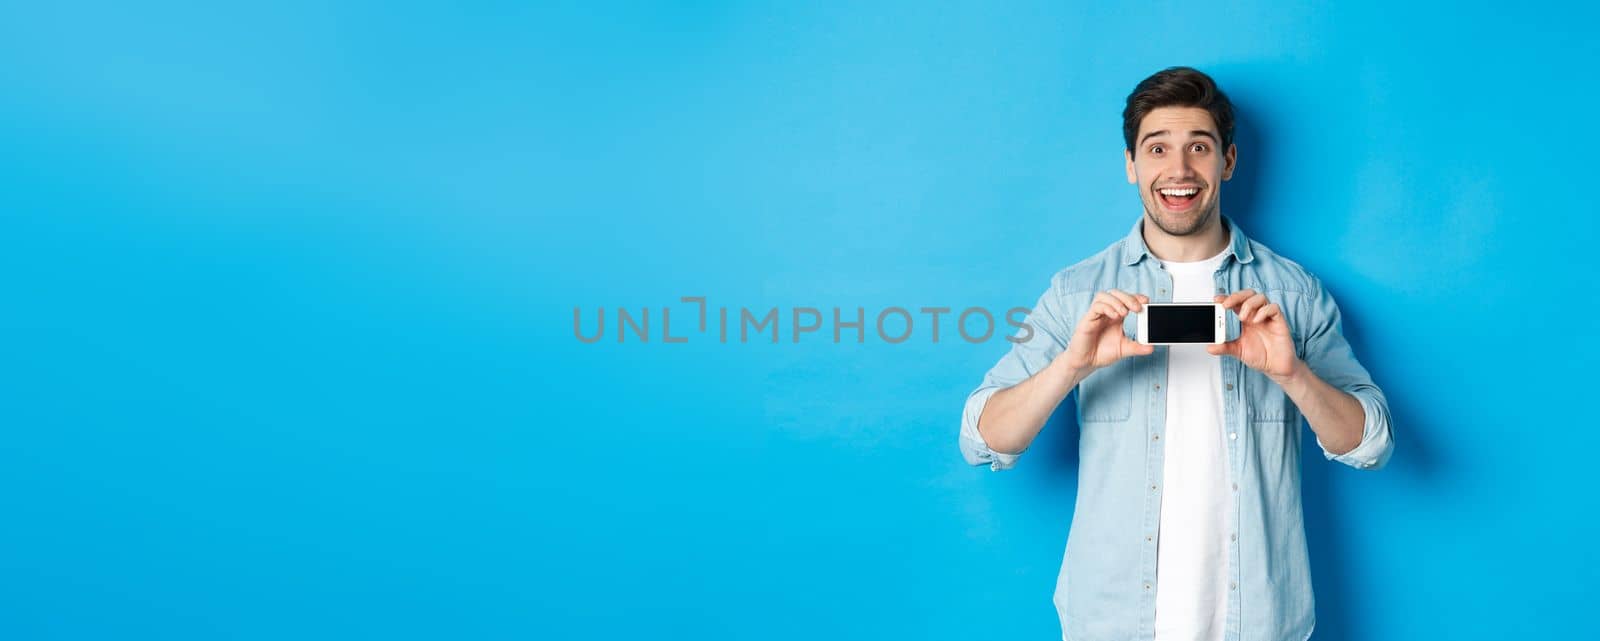 Amazed smiling man showing smartphone screen, internet promo offer, standing against blue background.